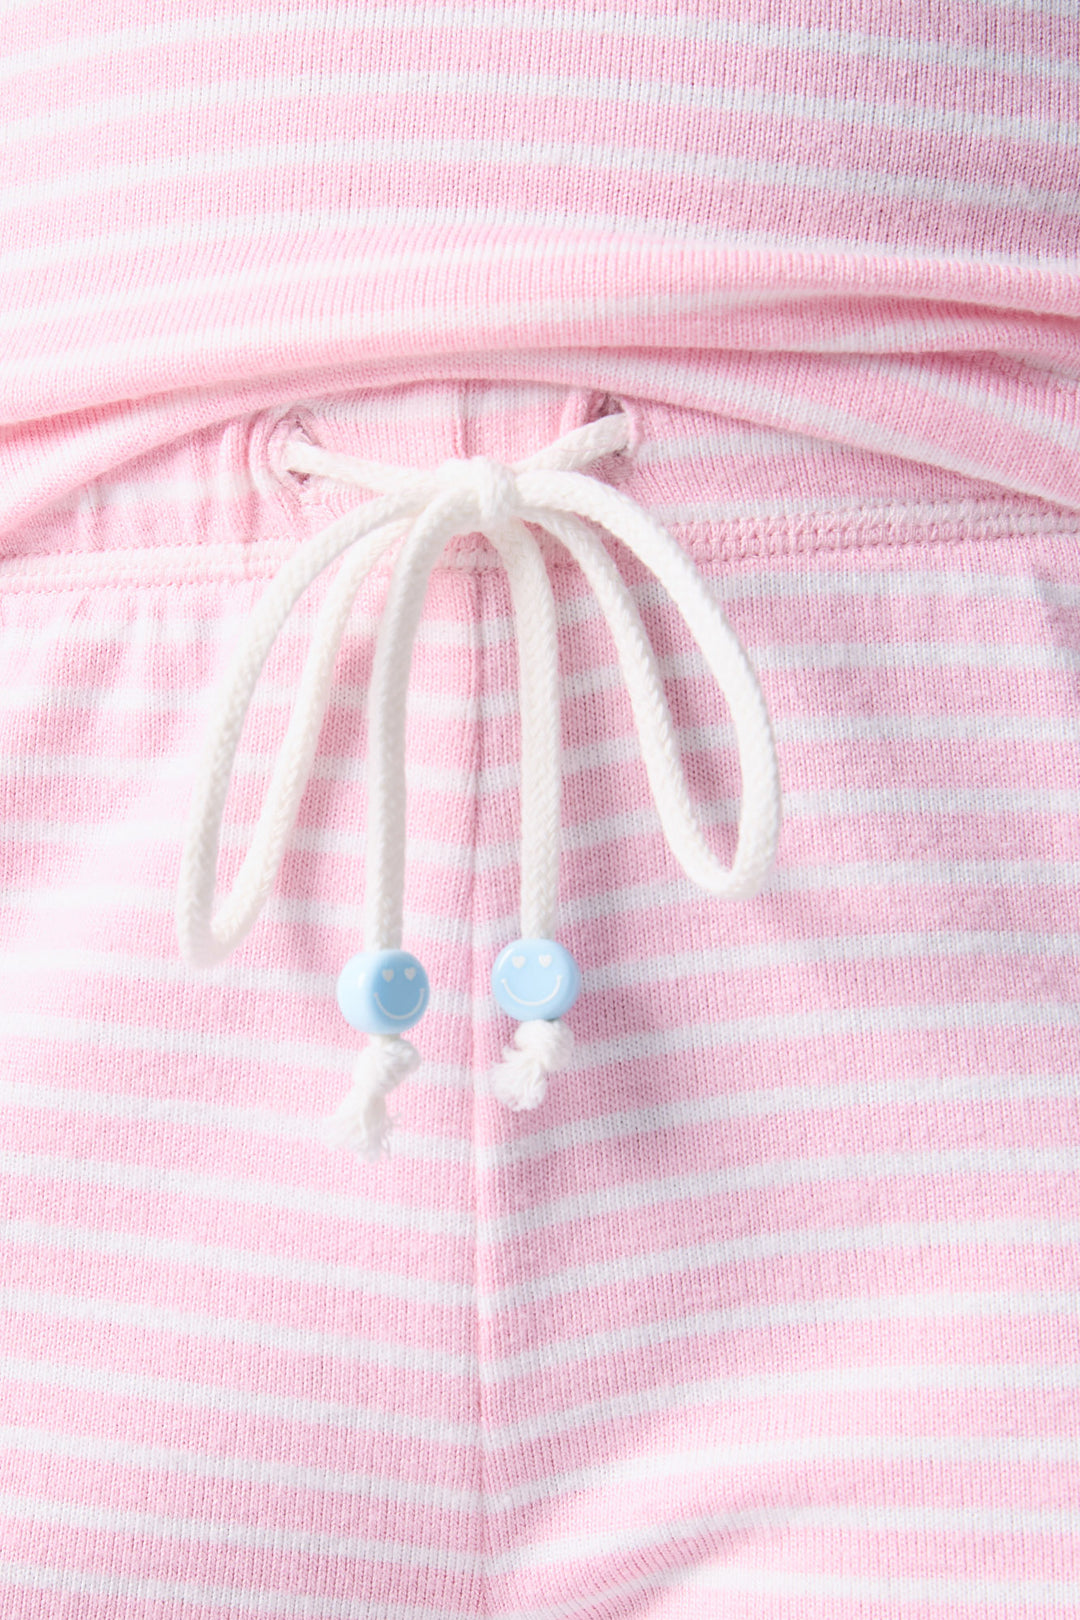 Women's pajama short in pink-ivory mini stripe, with contrast tipped drawcord.